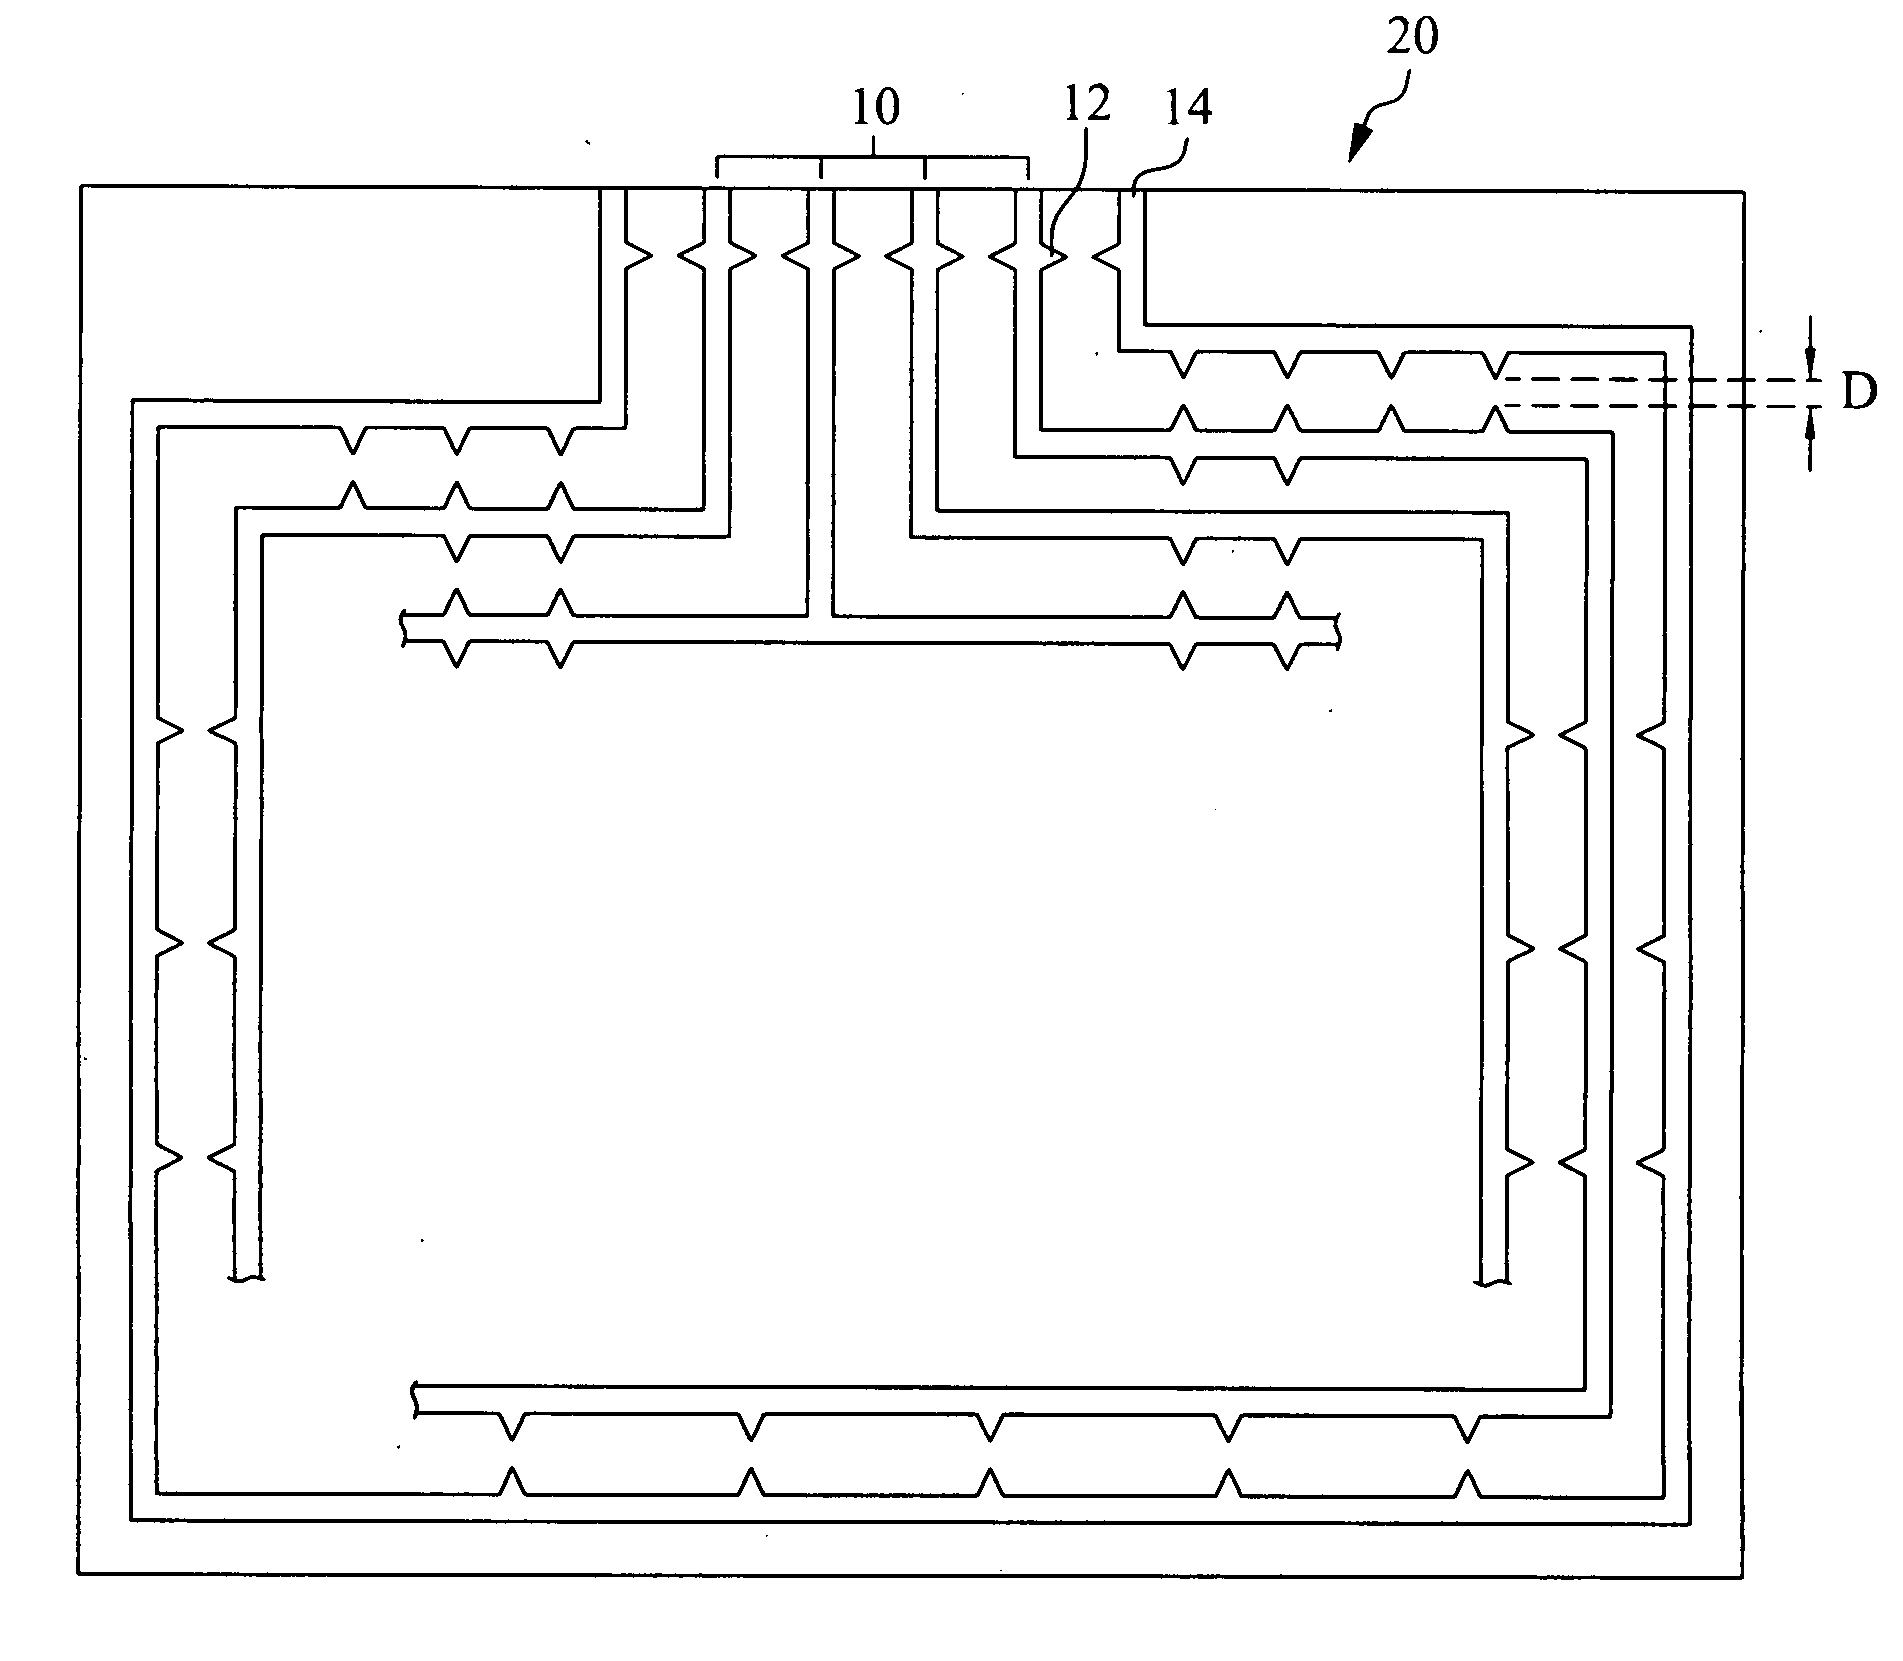 Electrostatic discharge protection device for touch panels